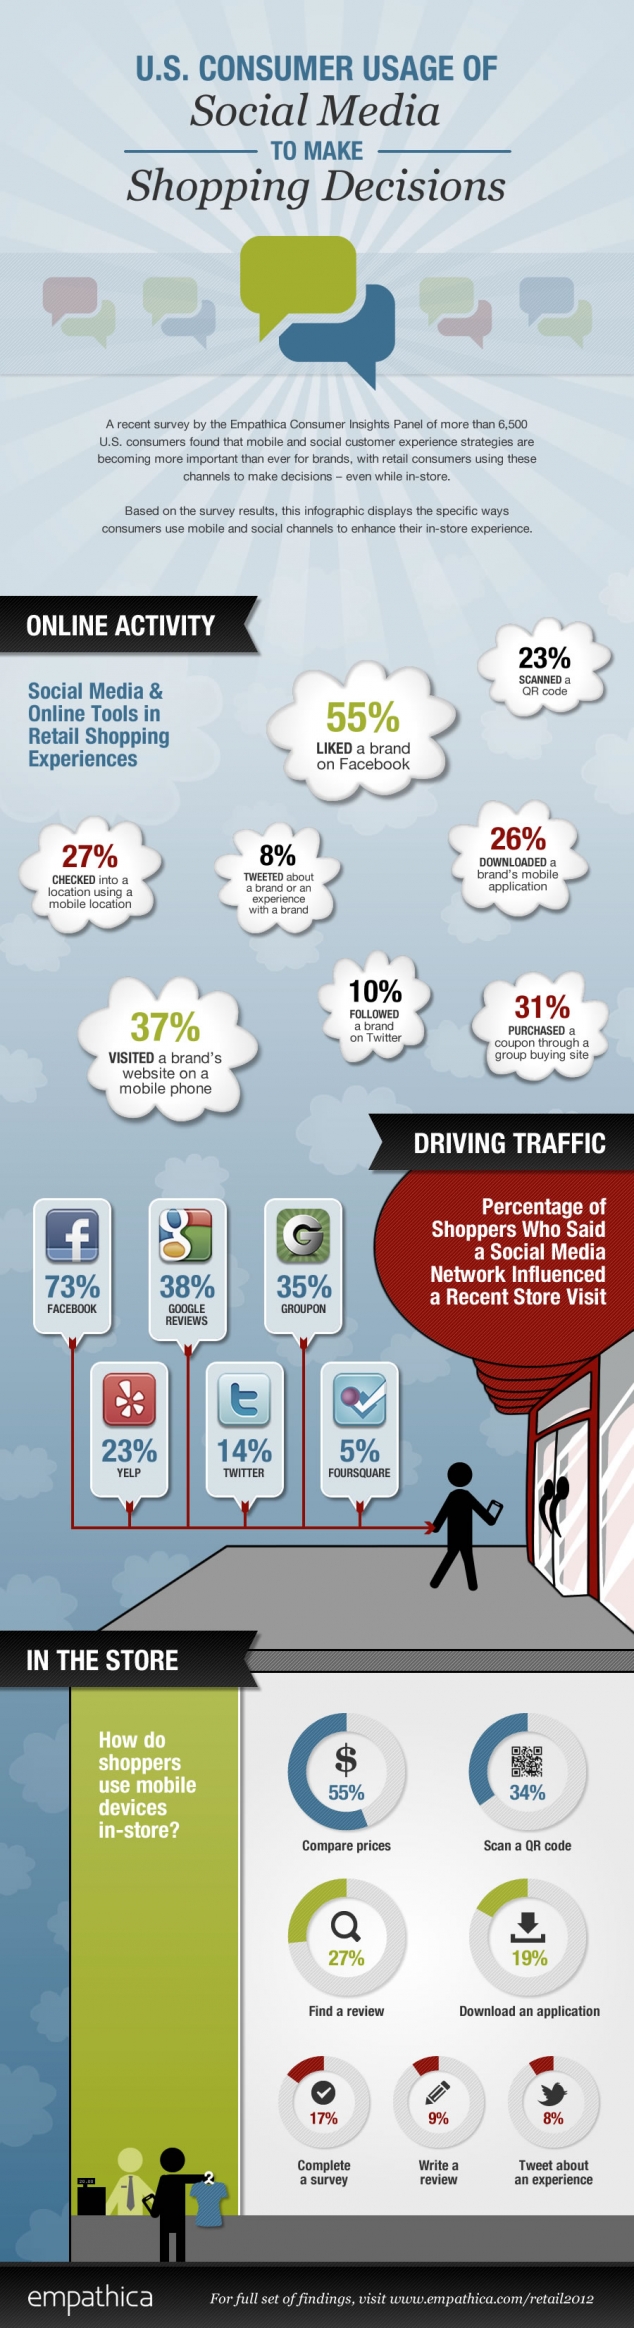 Consumer Usage of Mobile and Social Media to Make Shopping Decisions [infographic]